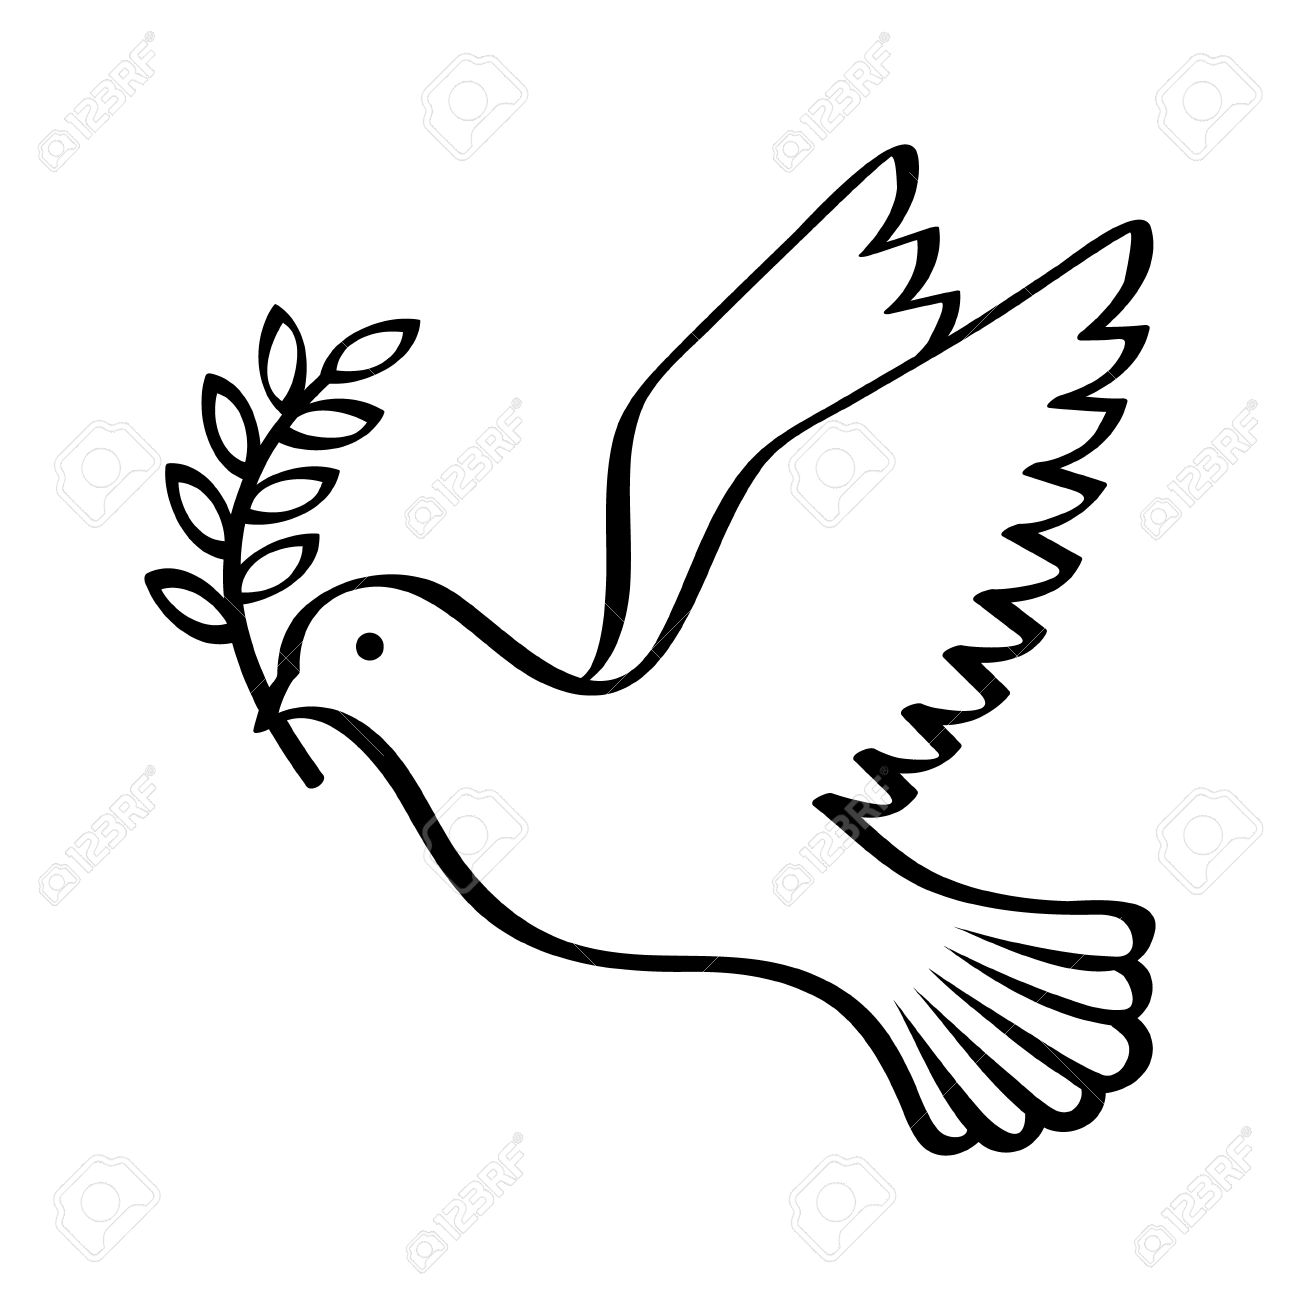 Clipart dove with.